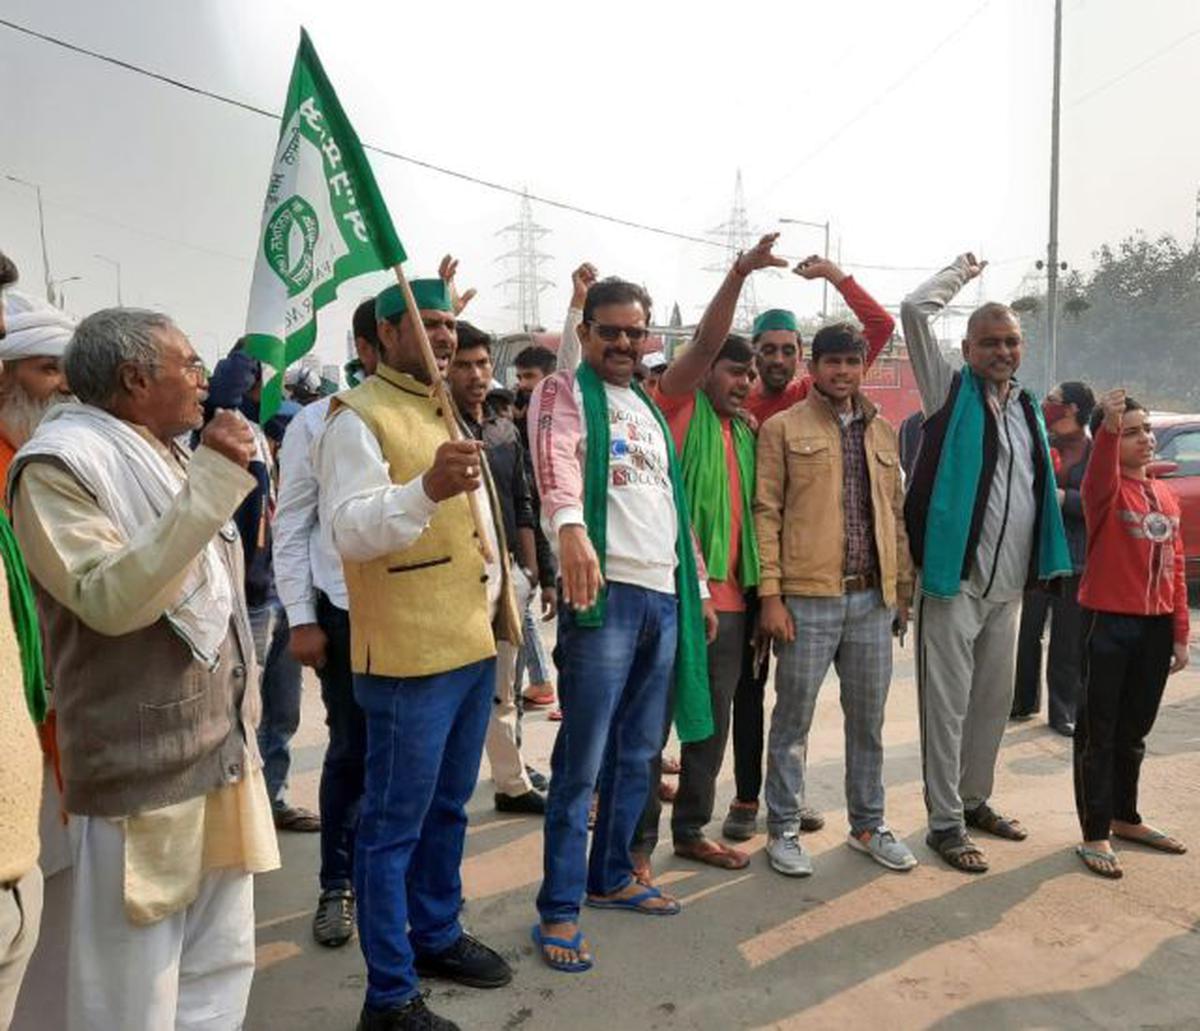 Farmers celebrating the Centre's decision to taking back the farm laws, at the Ghazipur border on Friday, November 19, 2021.